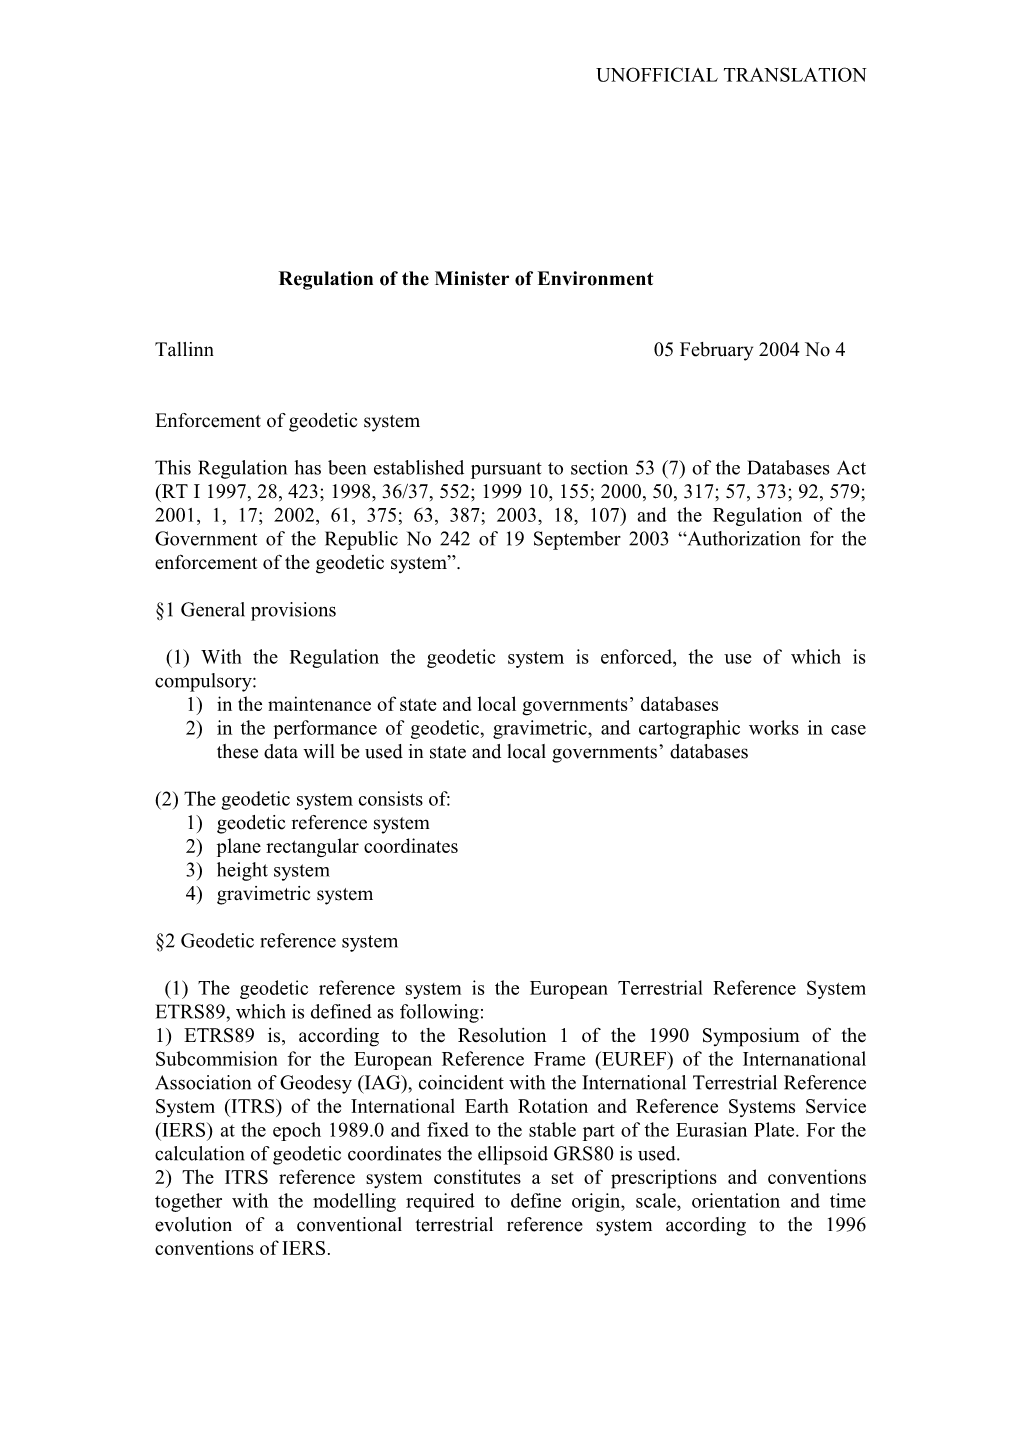 Regulation of the Minister of Environment